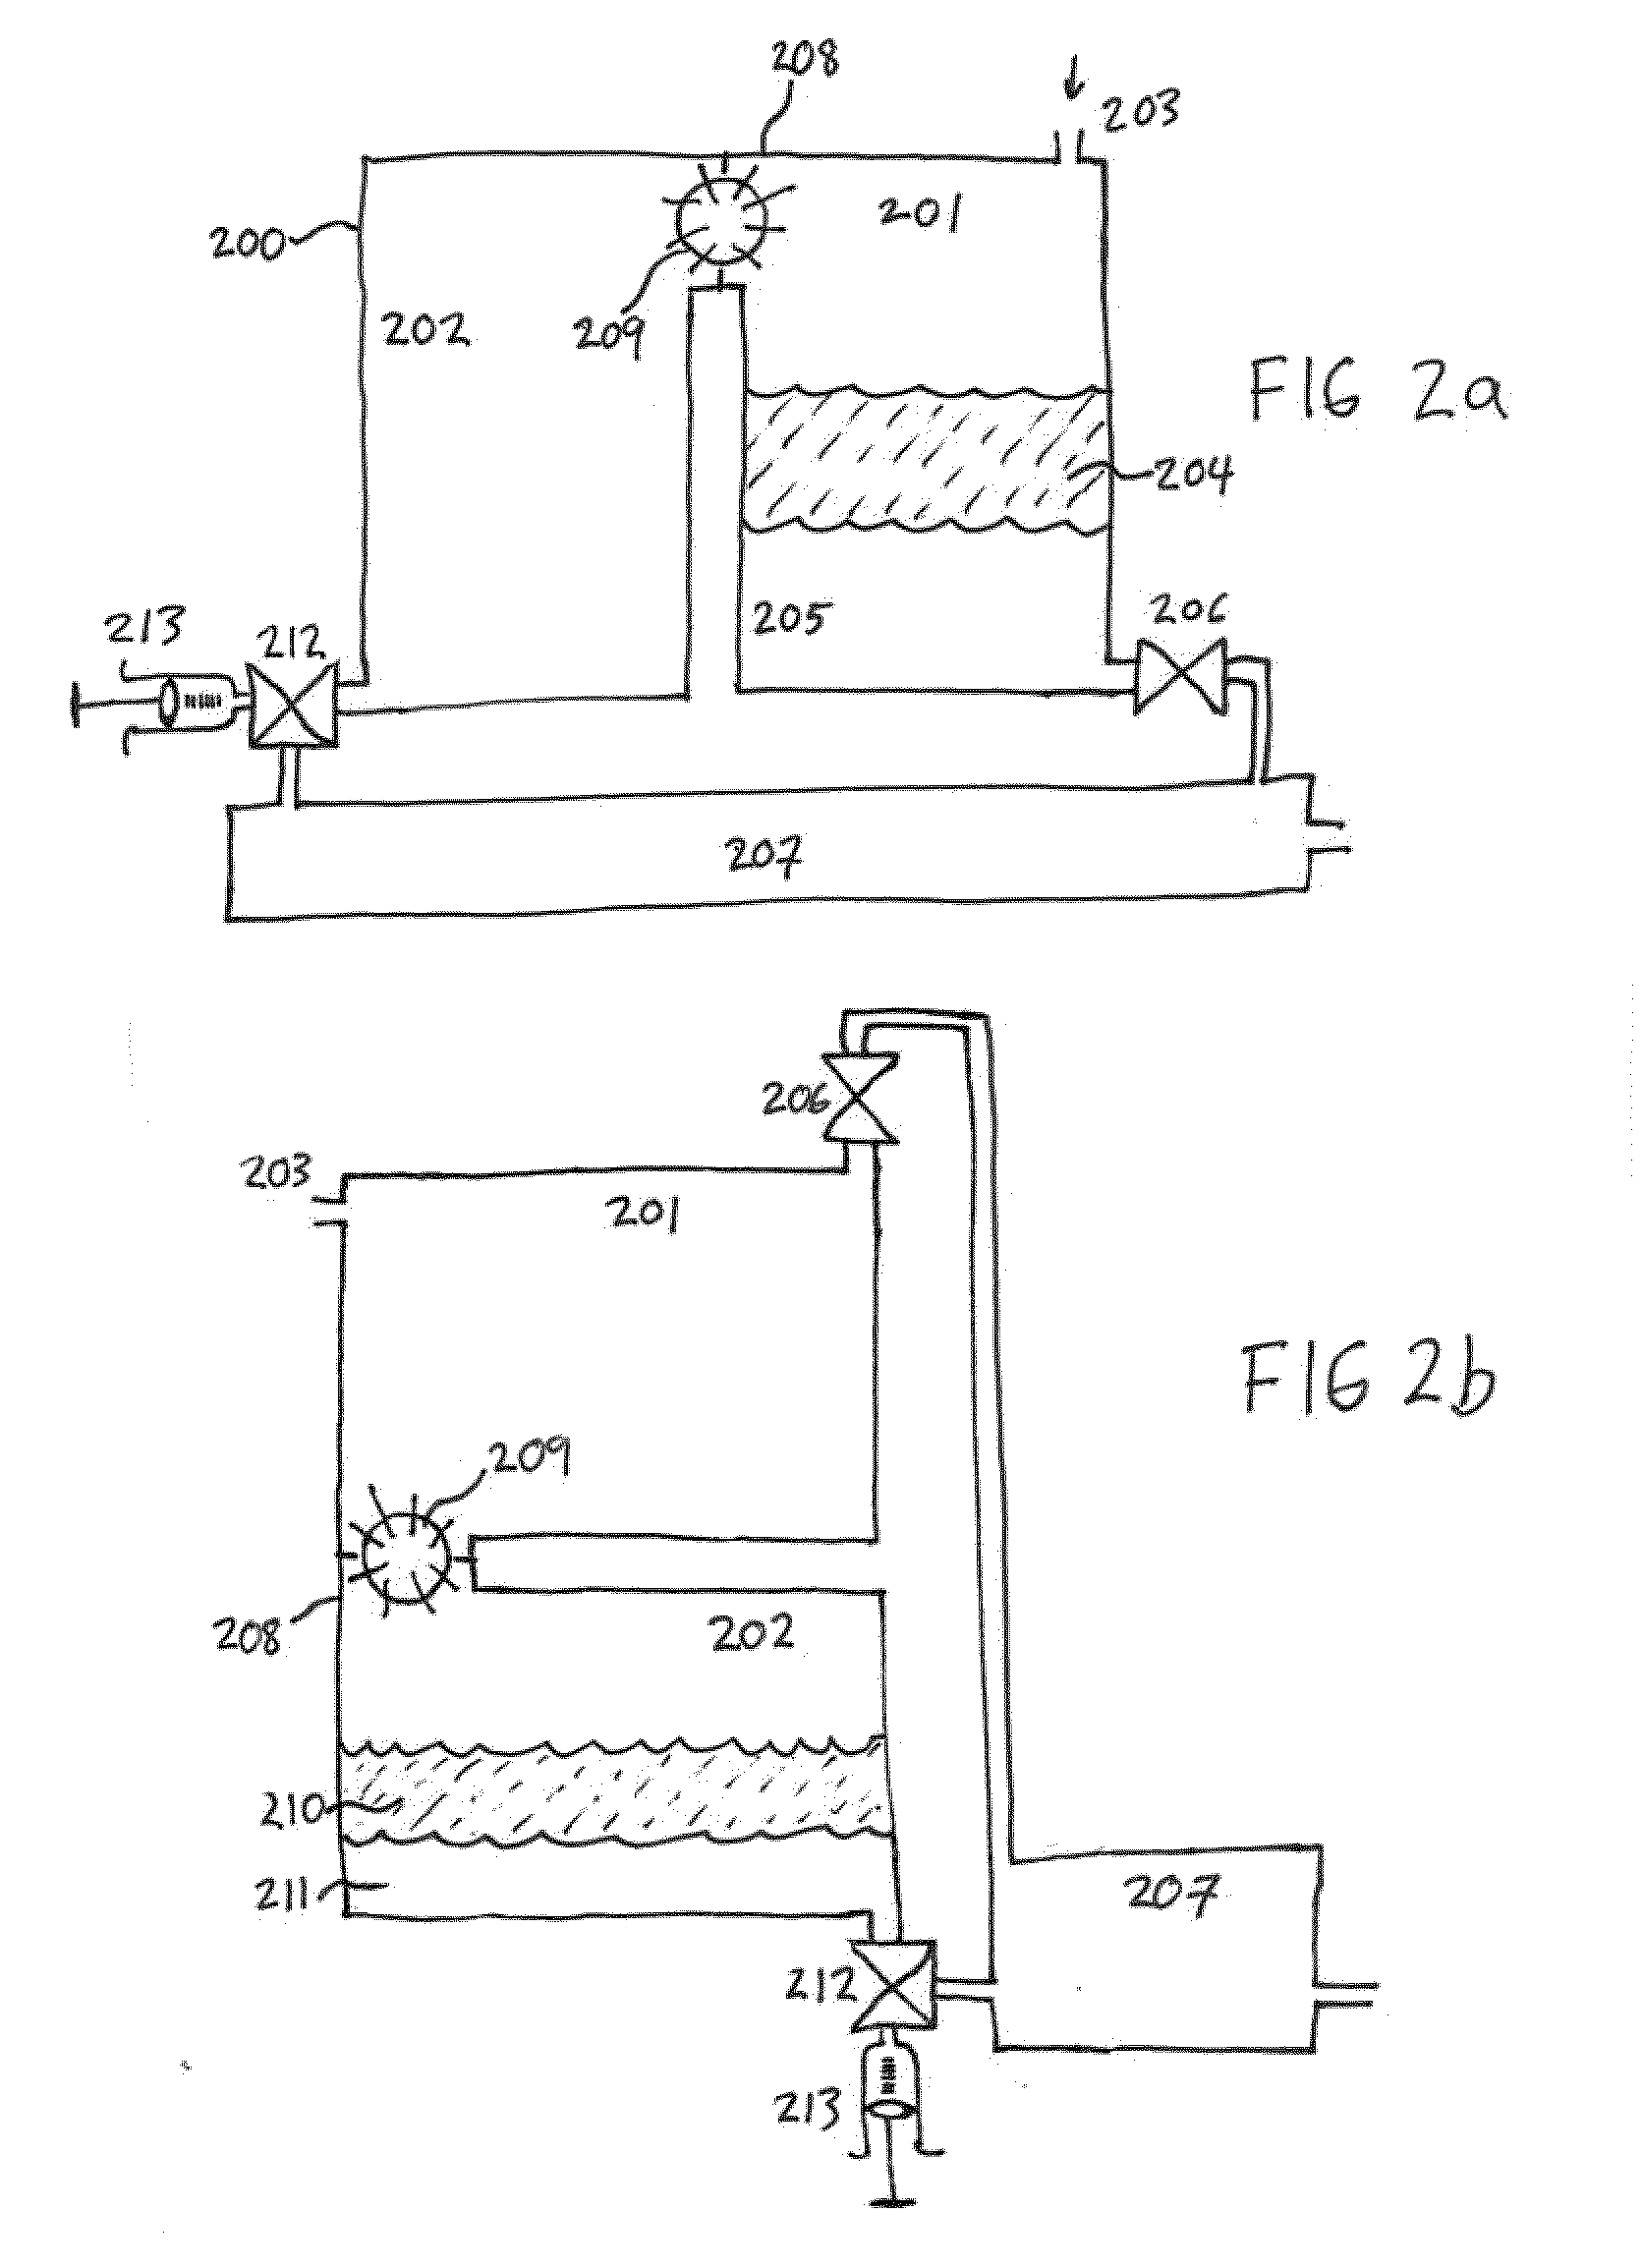 Adipose tissue collection and pre-processing devices for use in liposuction procedure